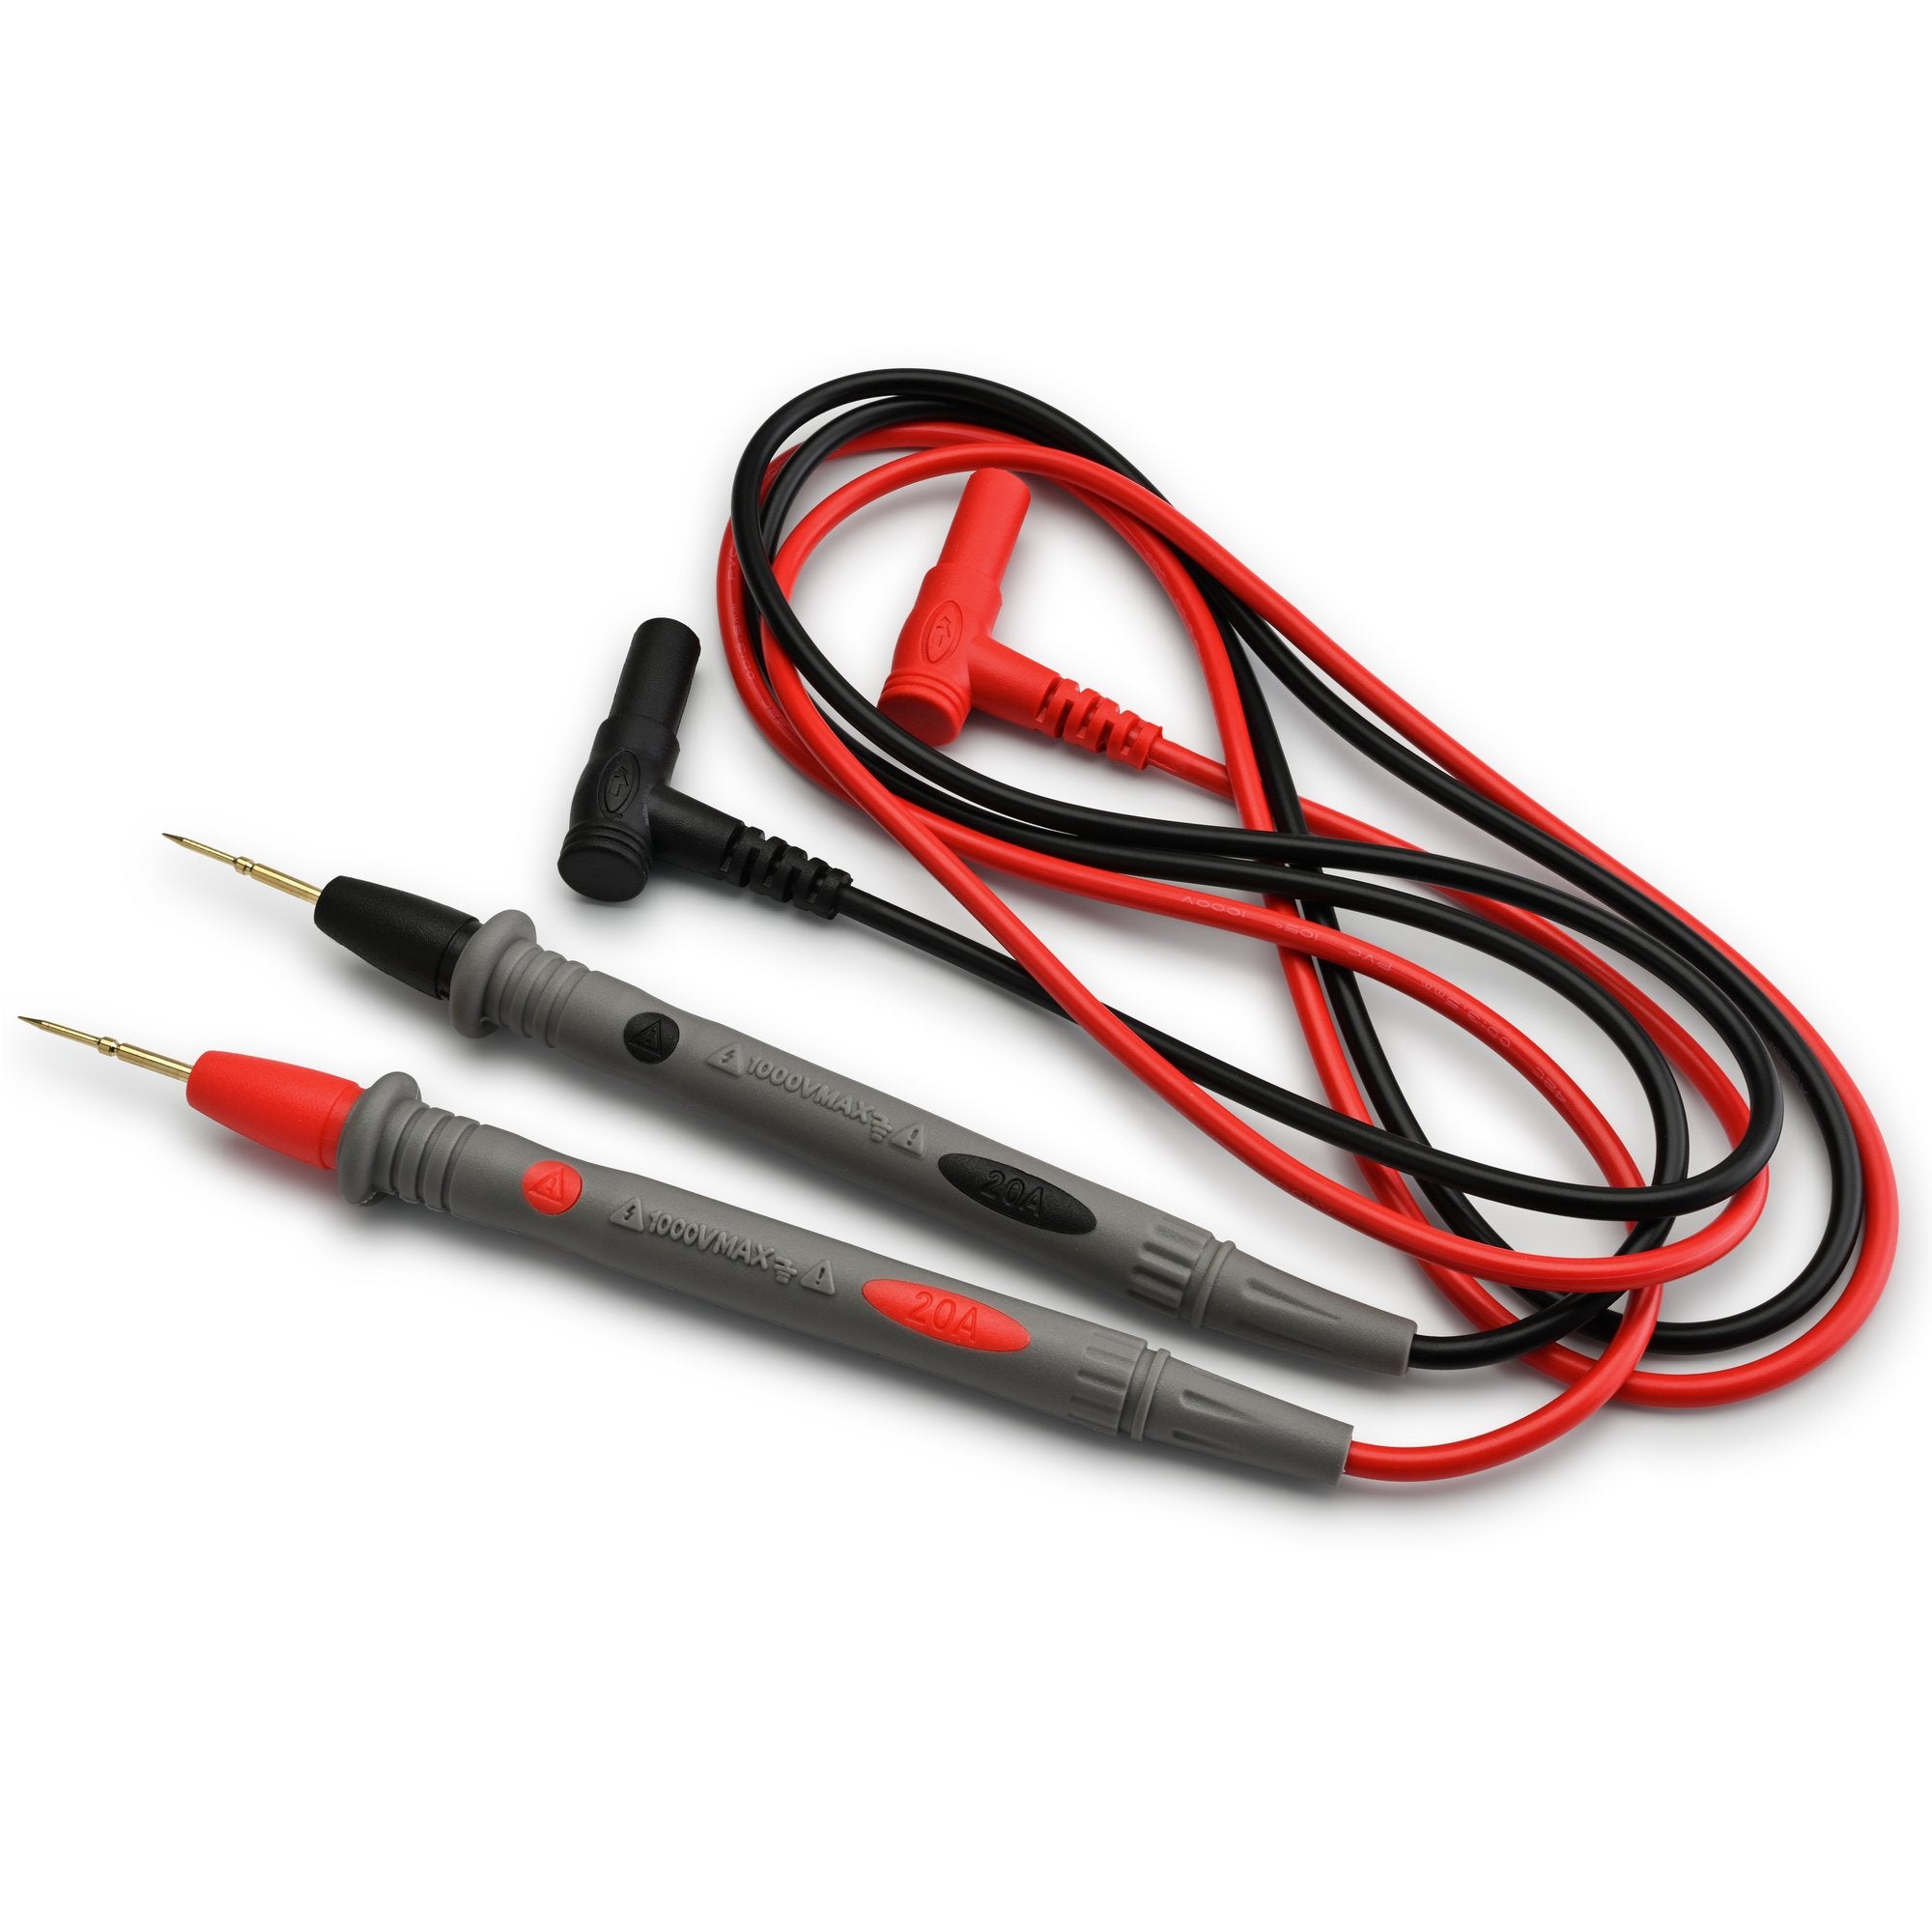 Multimeter Test Lead Probes Wire at Rs 22